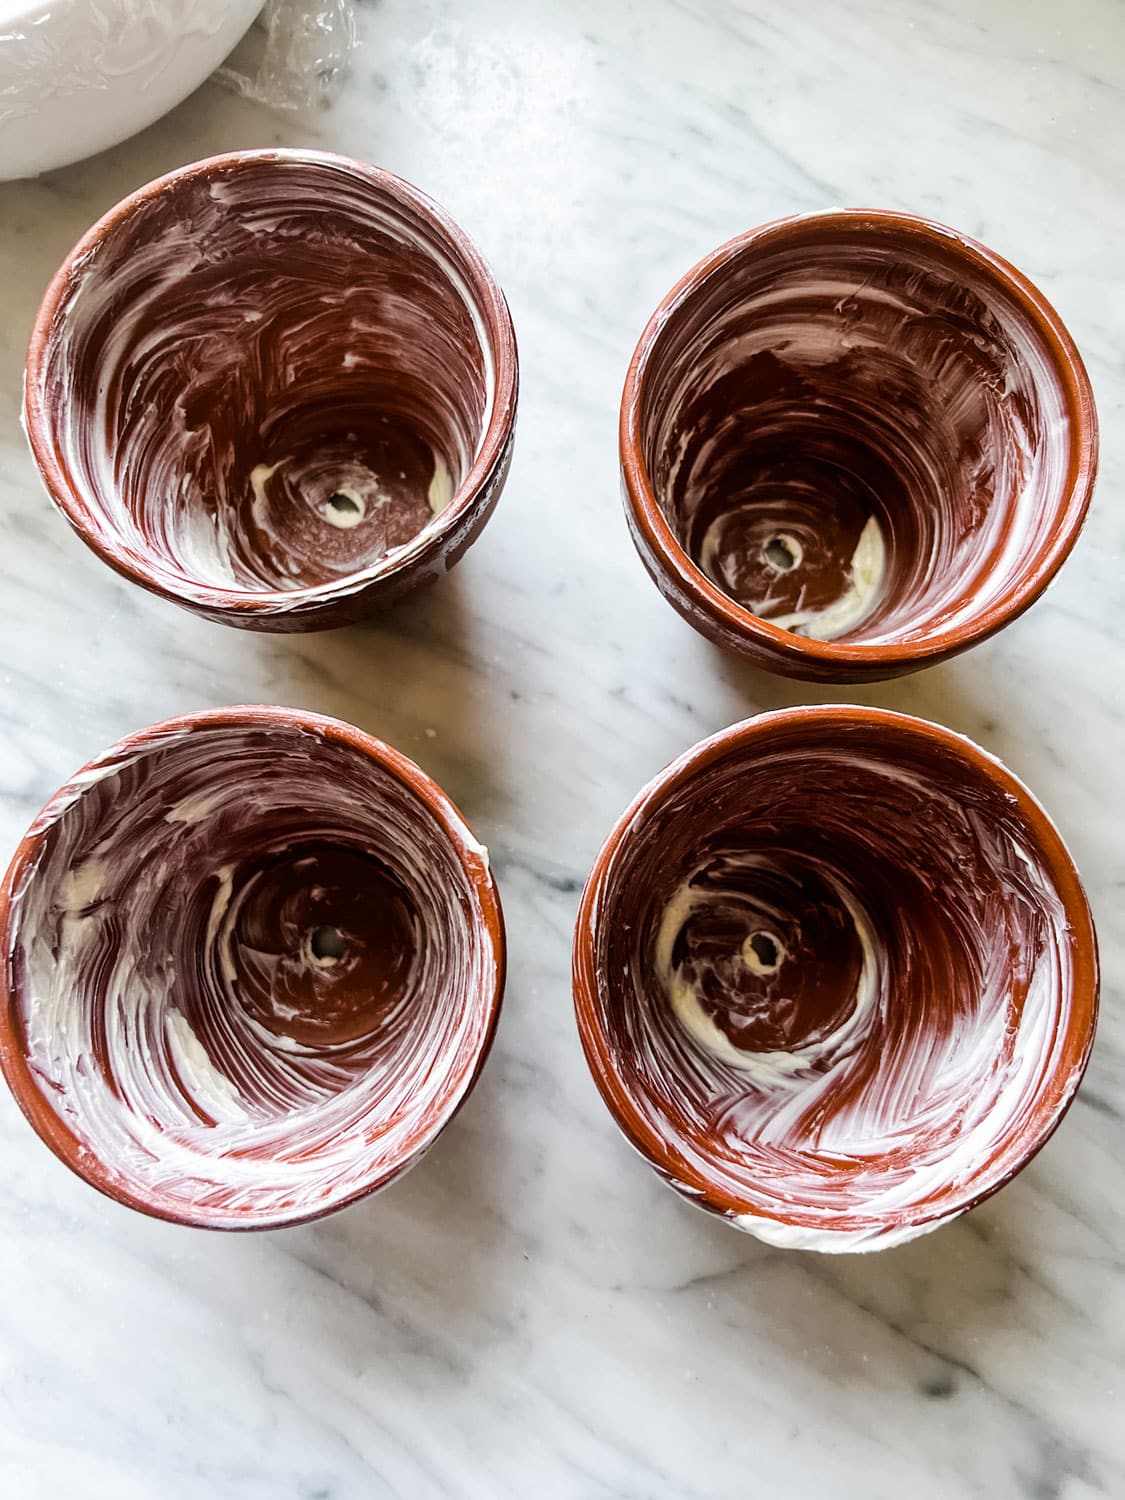 https://mostlovelythings.com/wp-content/uploads/2023/06/buttered-clay-pots.jpg